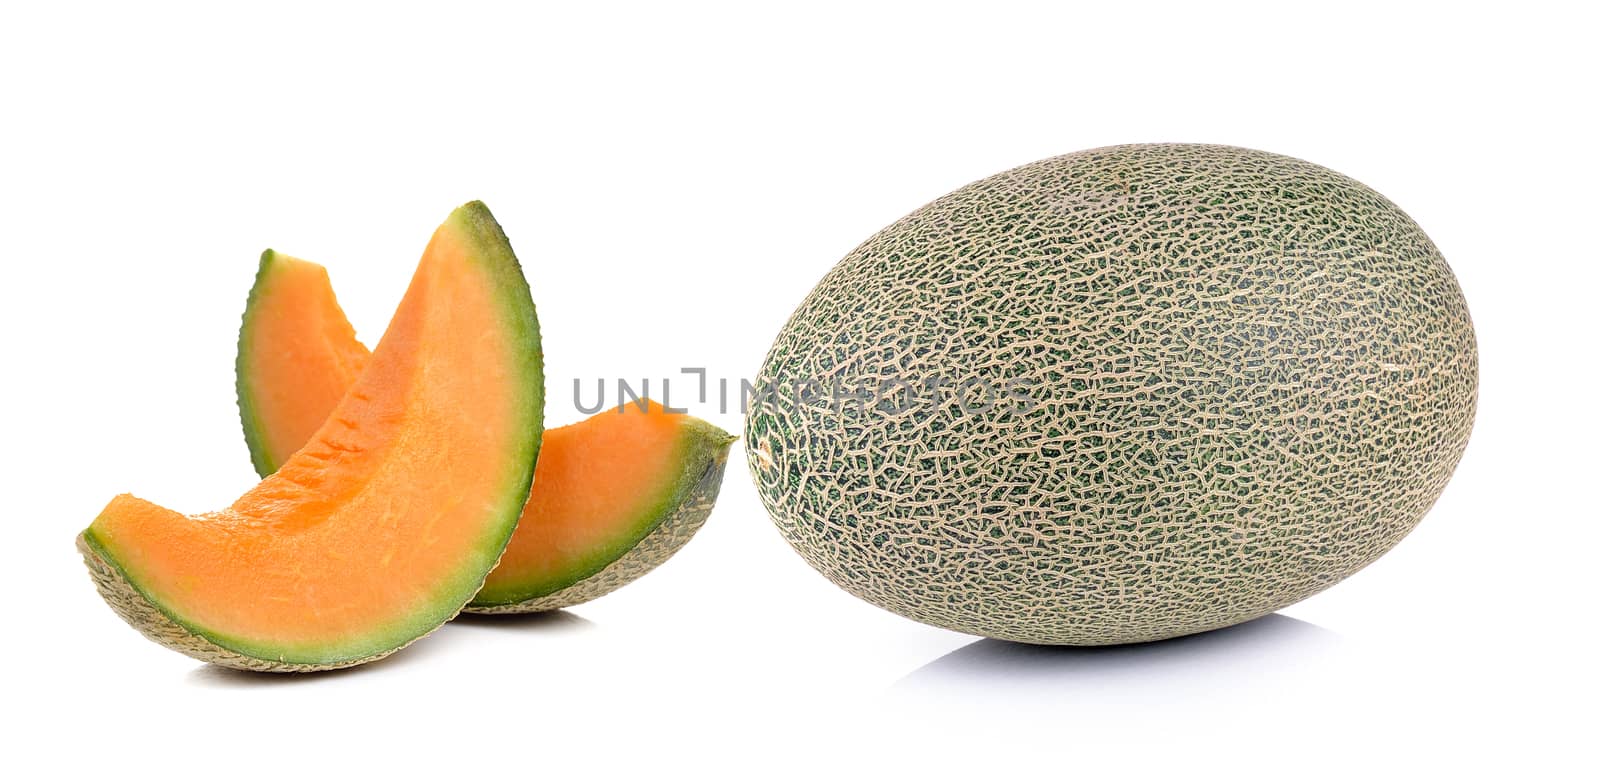 melon on white background by sommai